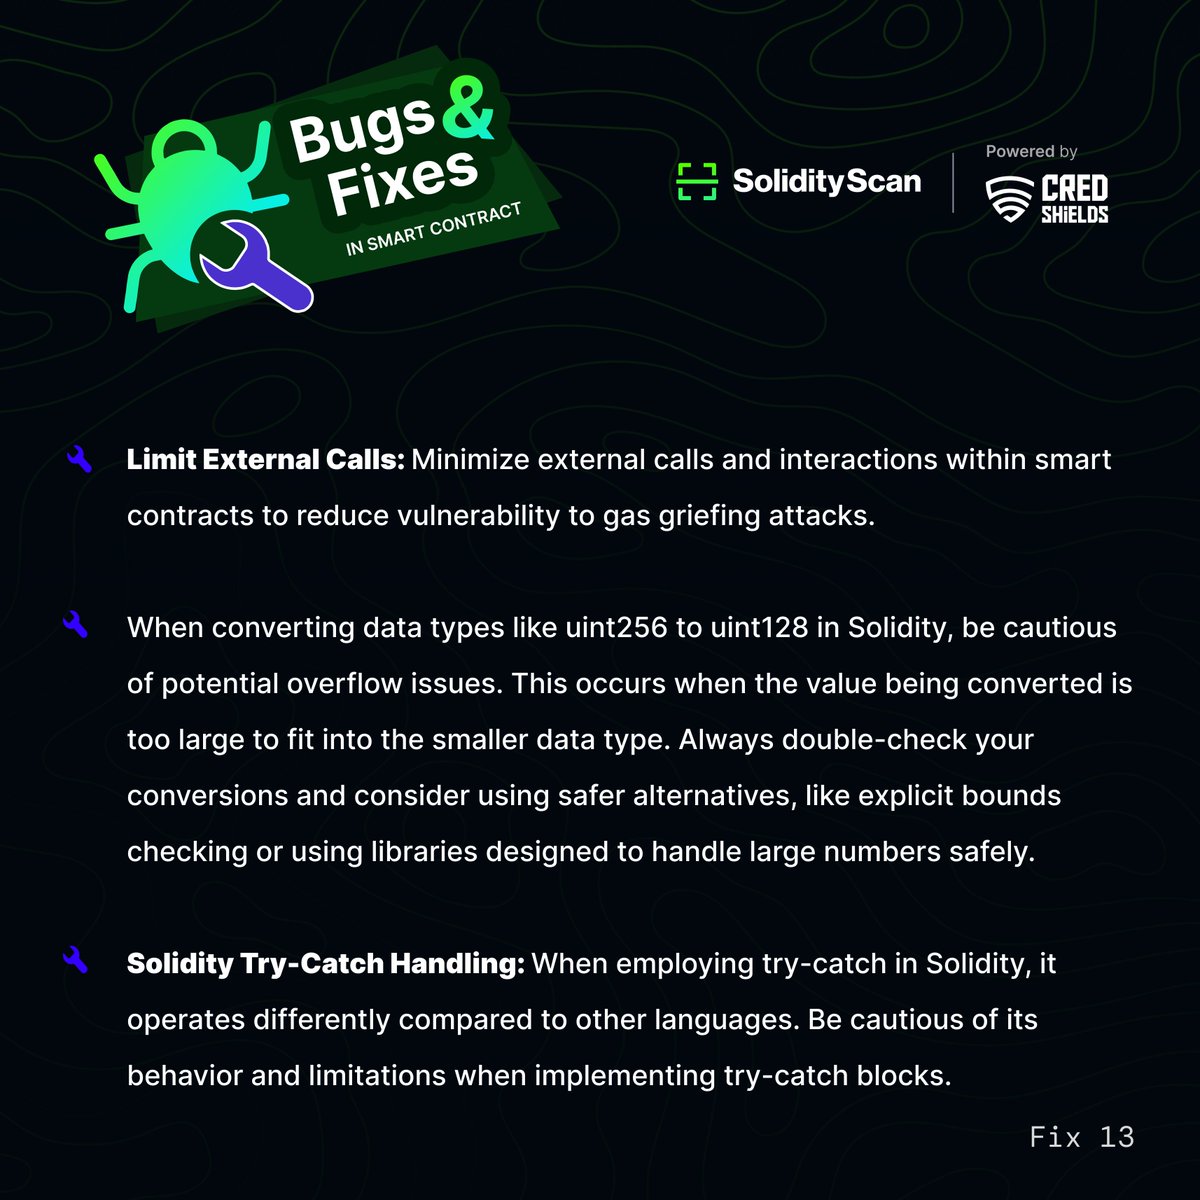 Get ready to crush bugs! Expert fixes incoming. #BugHunt #CyberSecurity #Web3